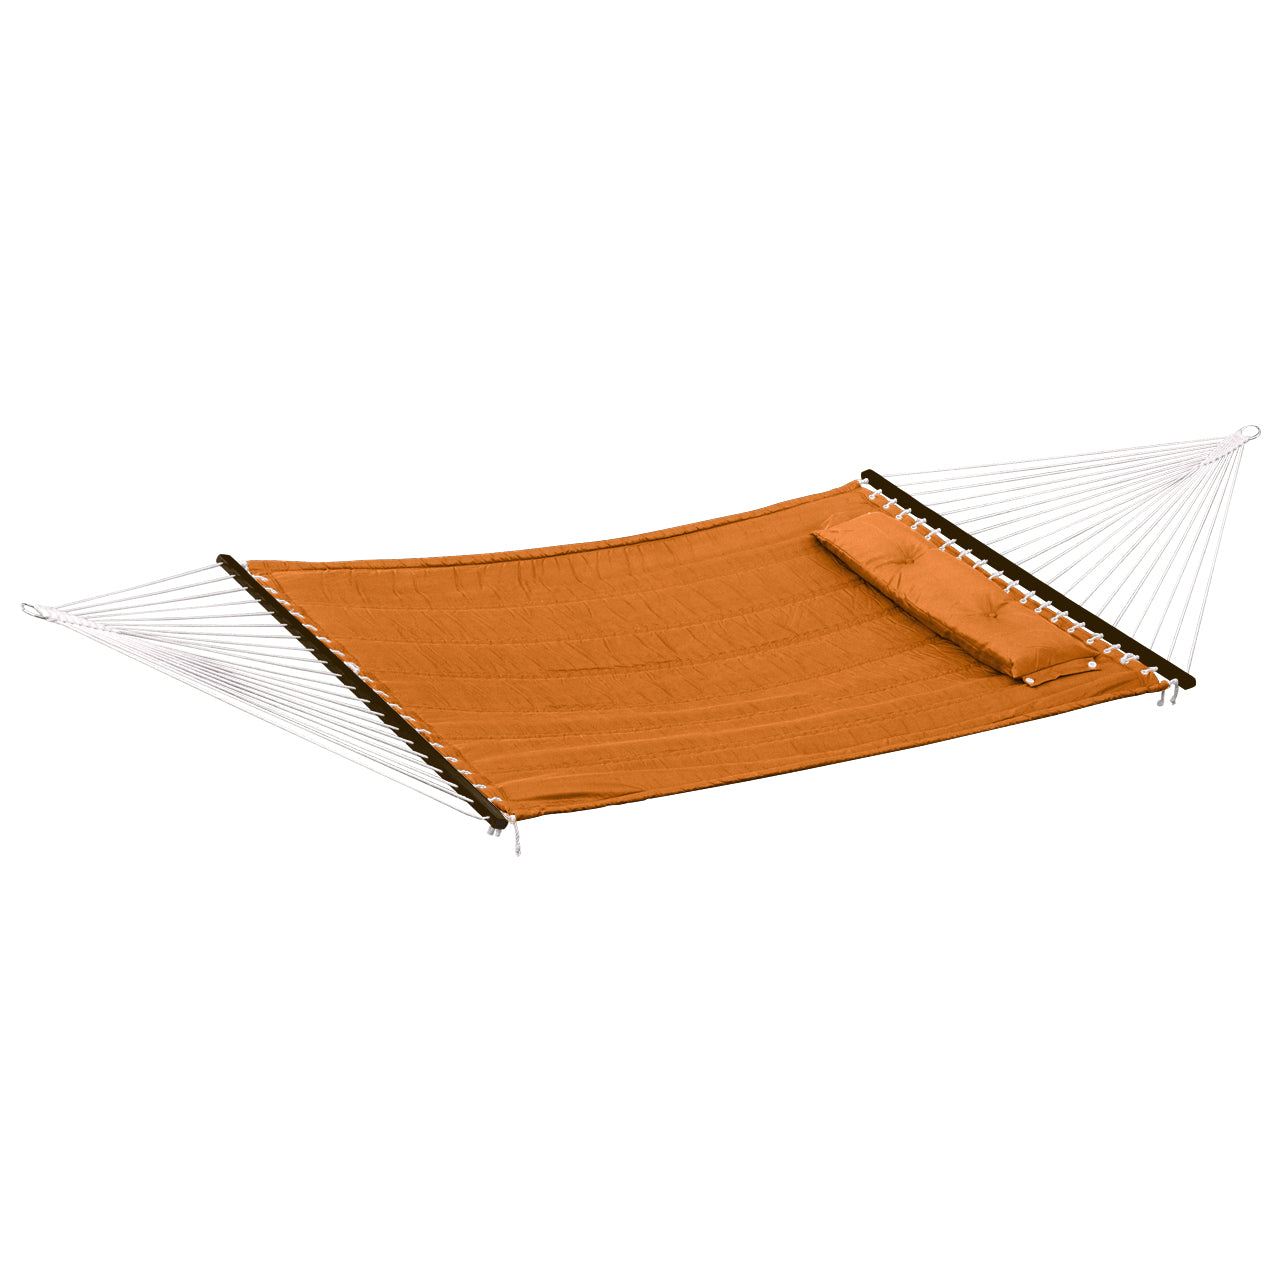 Bliss Hammocks 55-inch Wide Quilted Hammock with Spreader Bars and Pillow in the terracotta variation.